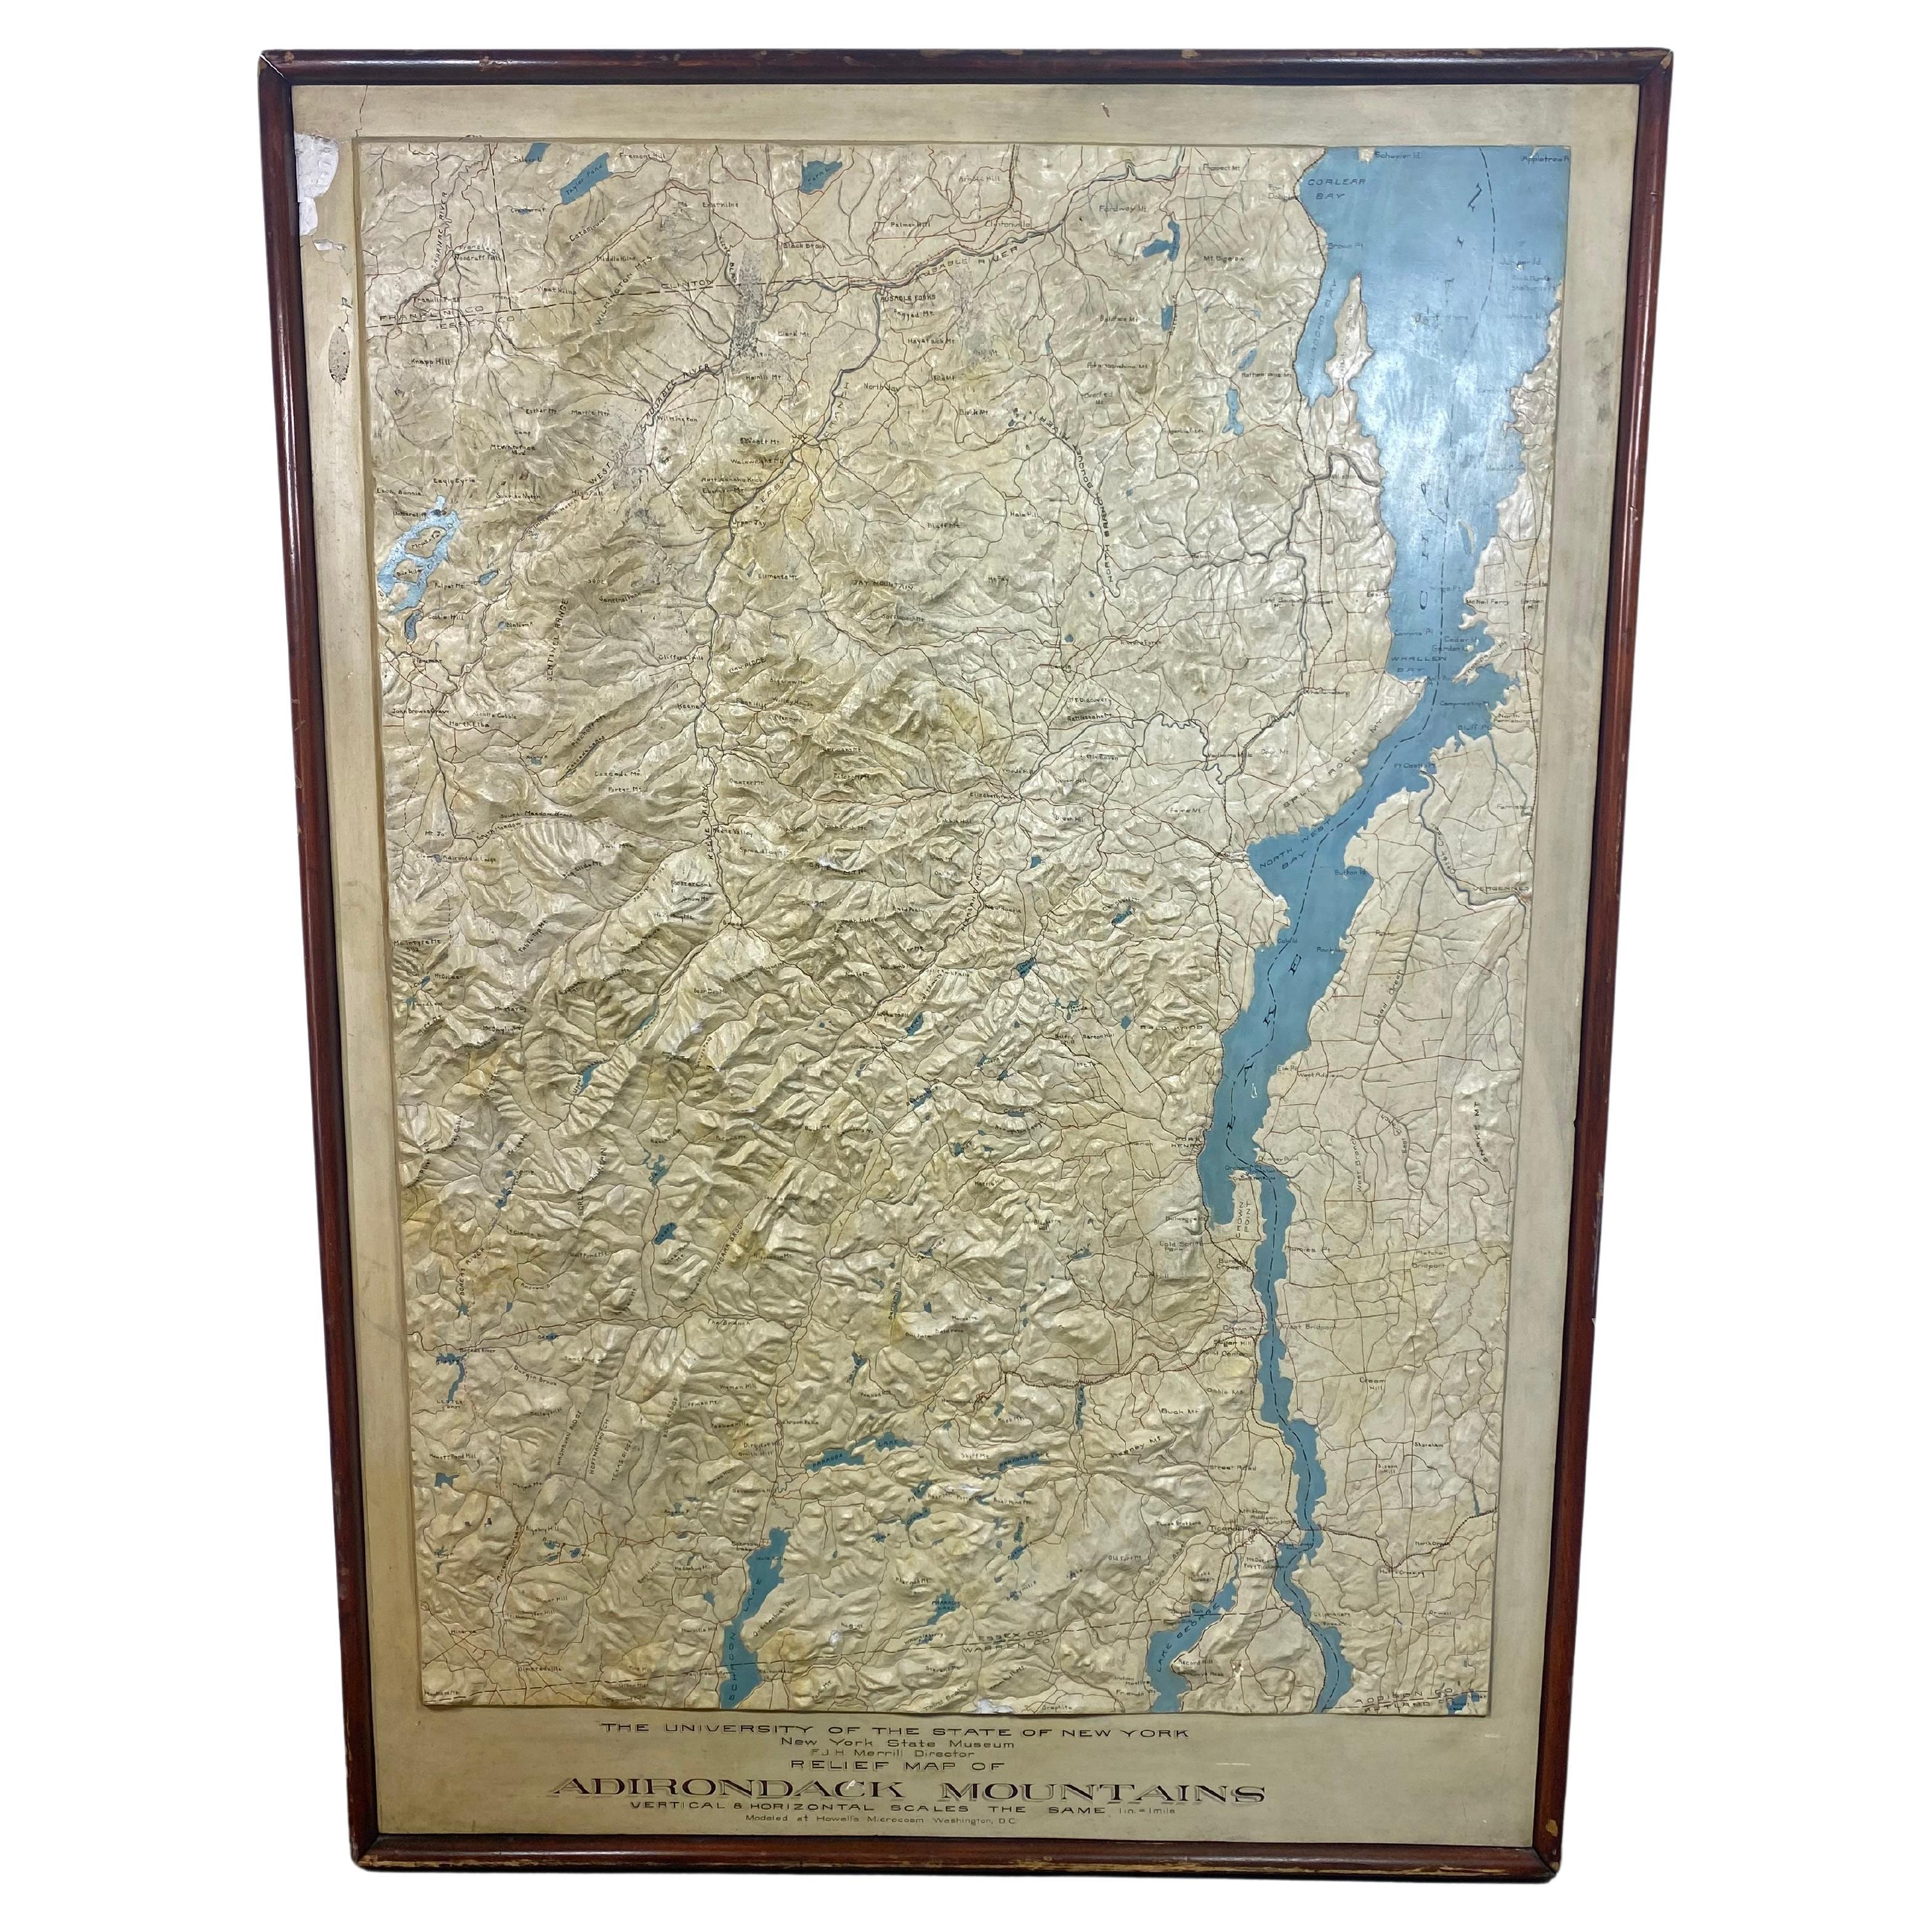 Rare and Early Plaster Relief Map of Adirondack Mountains by F J H Merrill